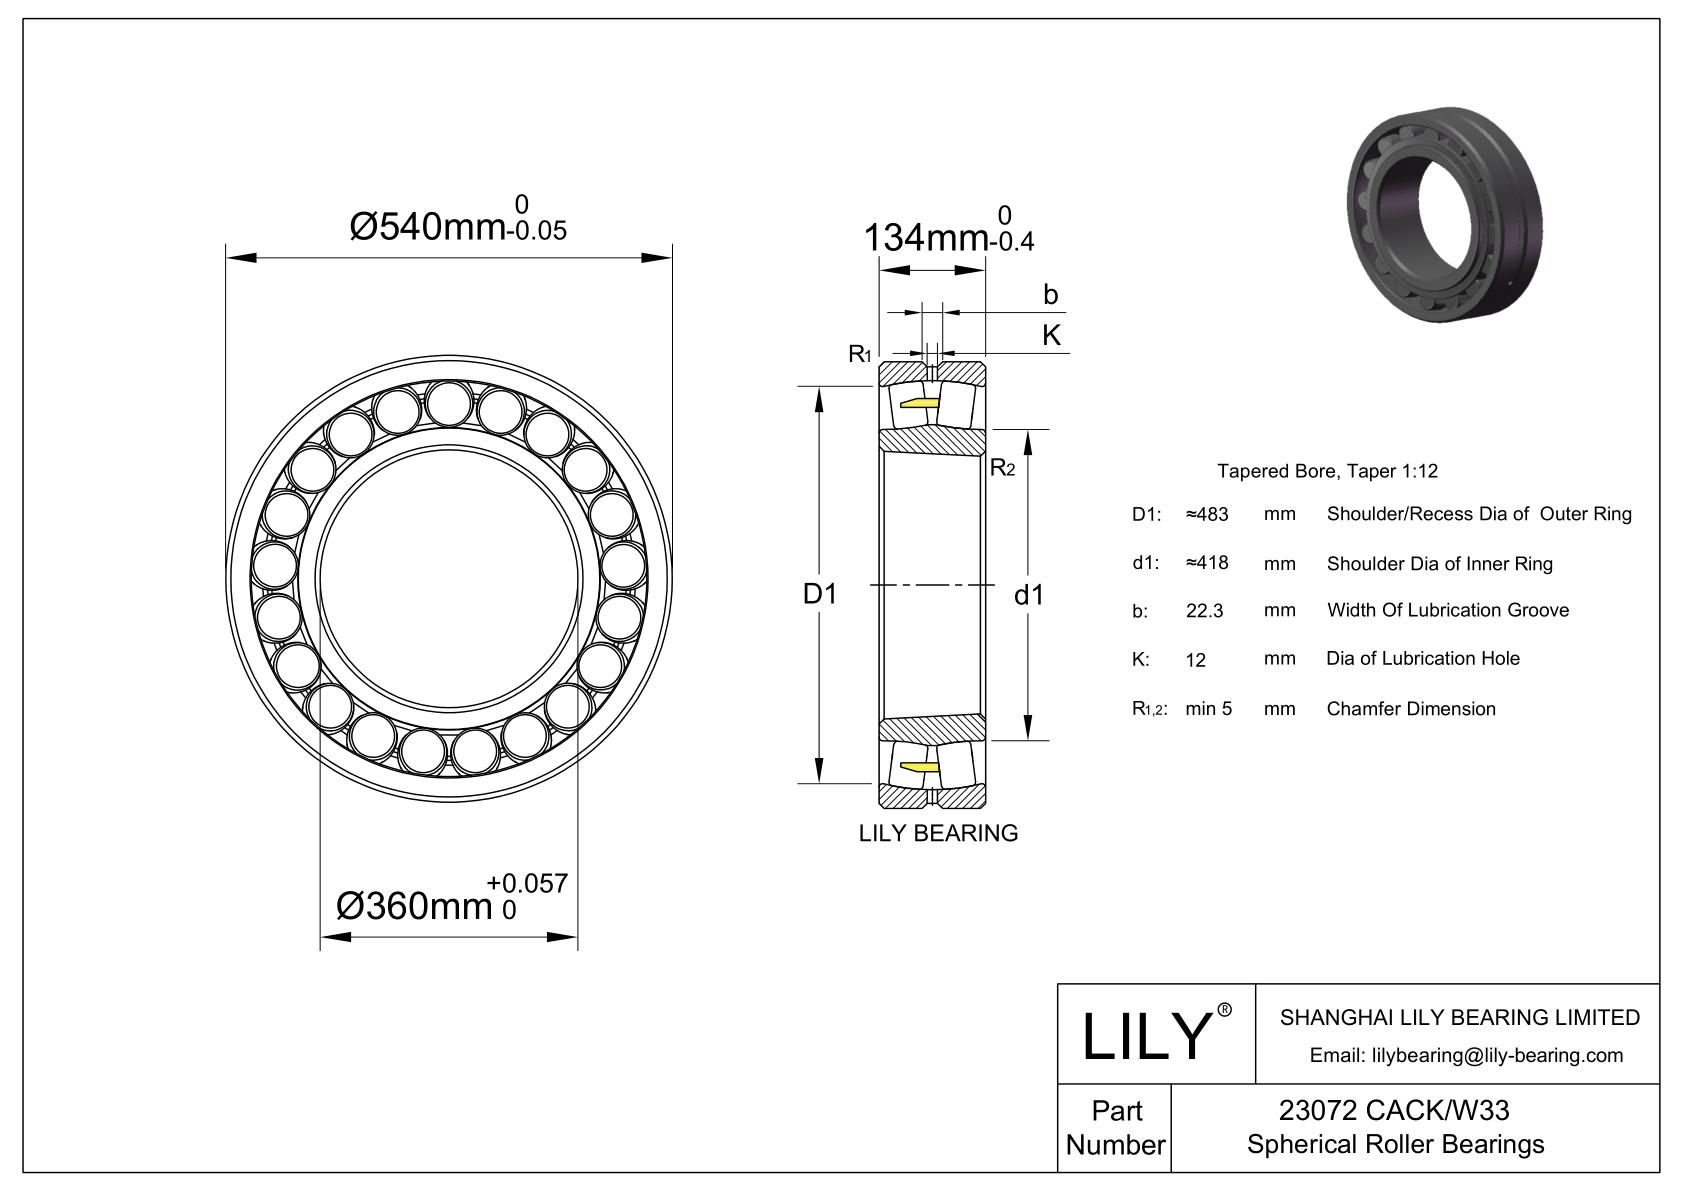 23072 CACK/W33 Double Row Spherical Roller Bearing cad drawing